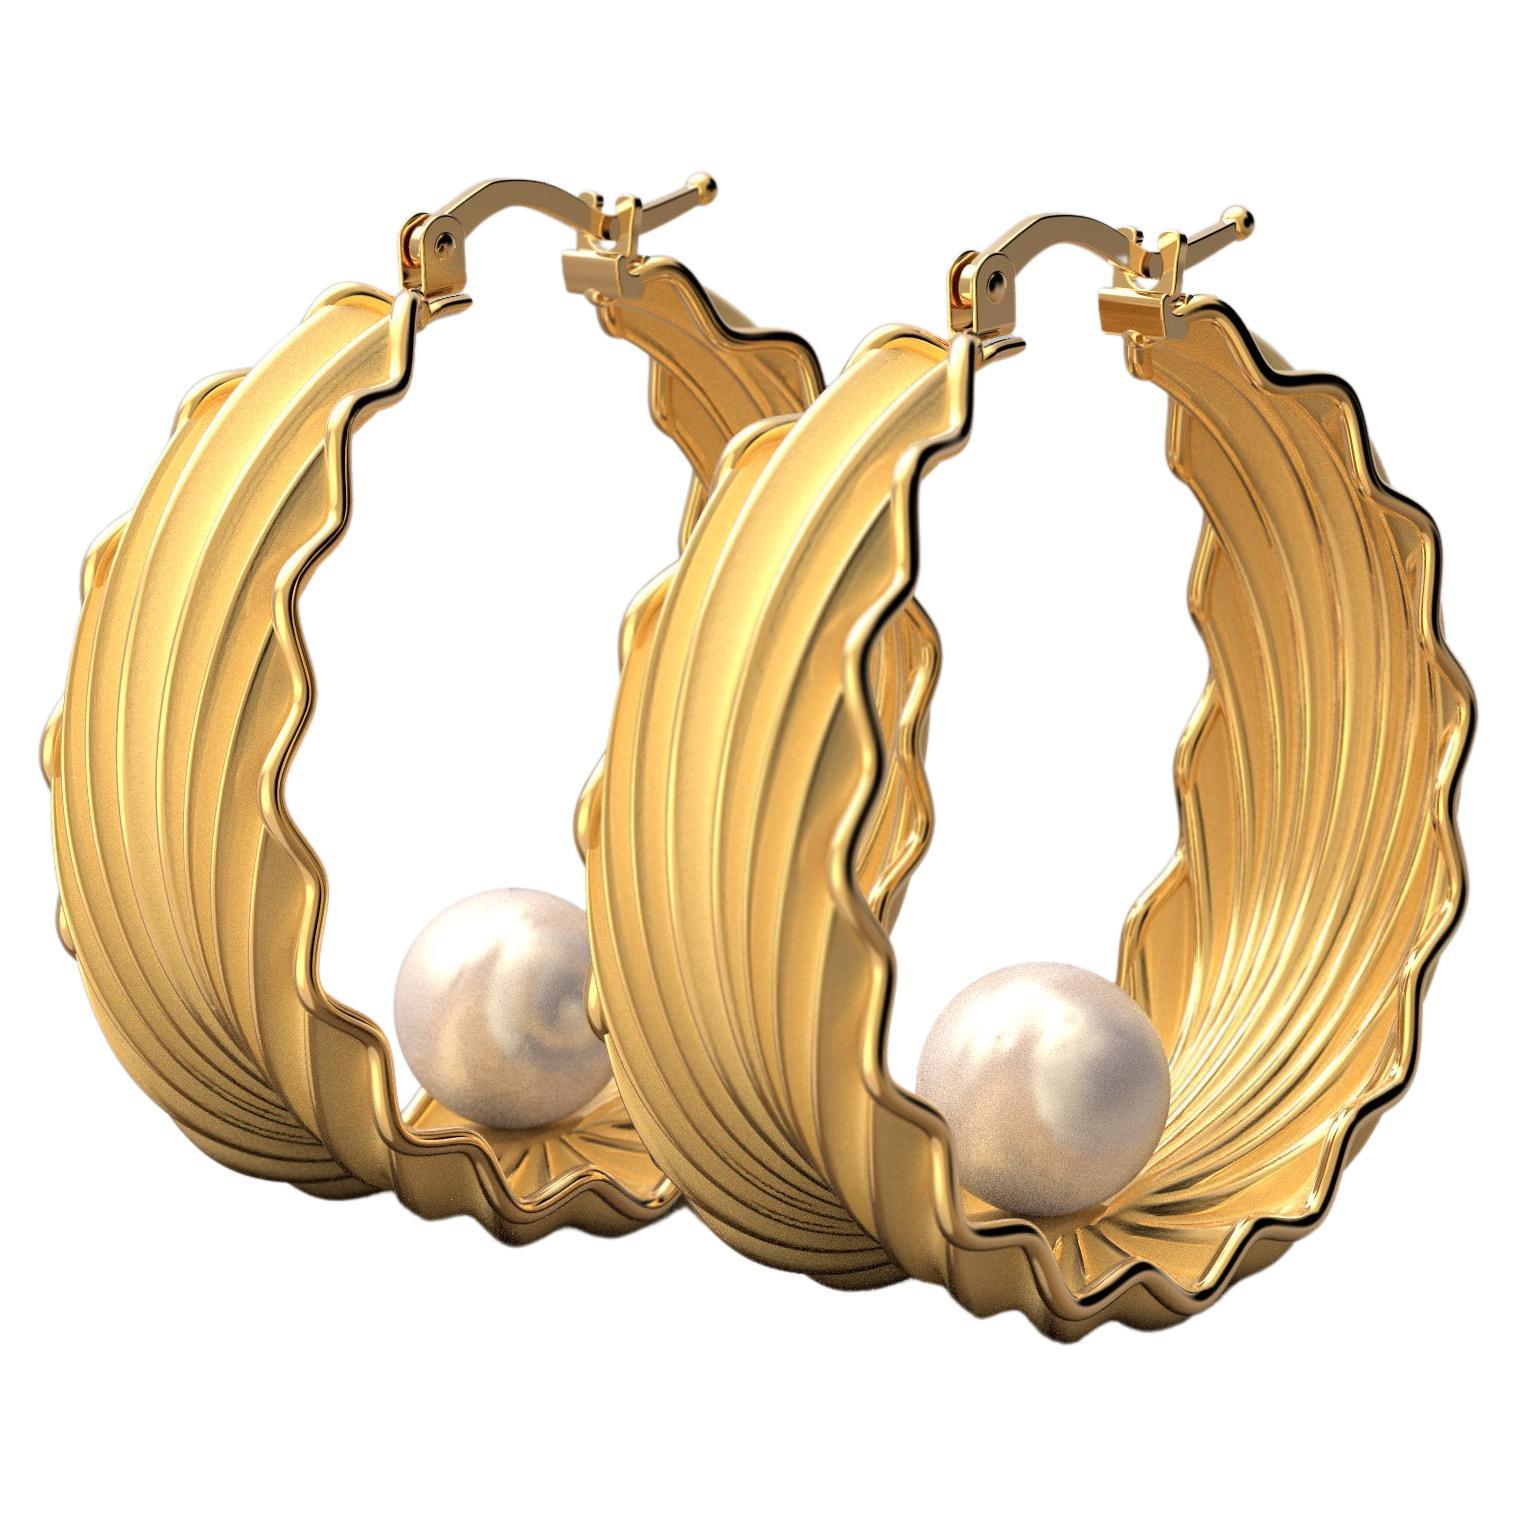 Oltremare Gioielli hoop earrings, natural white Akoya pearls, Japanese pearl earrings.
32 mm diameter beautiful hoop earrings crafted in polished and raw solid gold 14k with natural sea pearl
Click top closure Gold hoop earrings made in Italy.
The